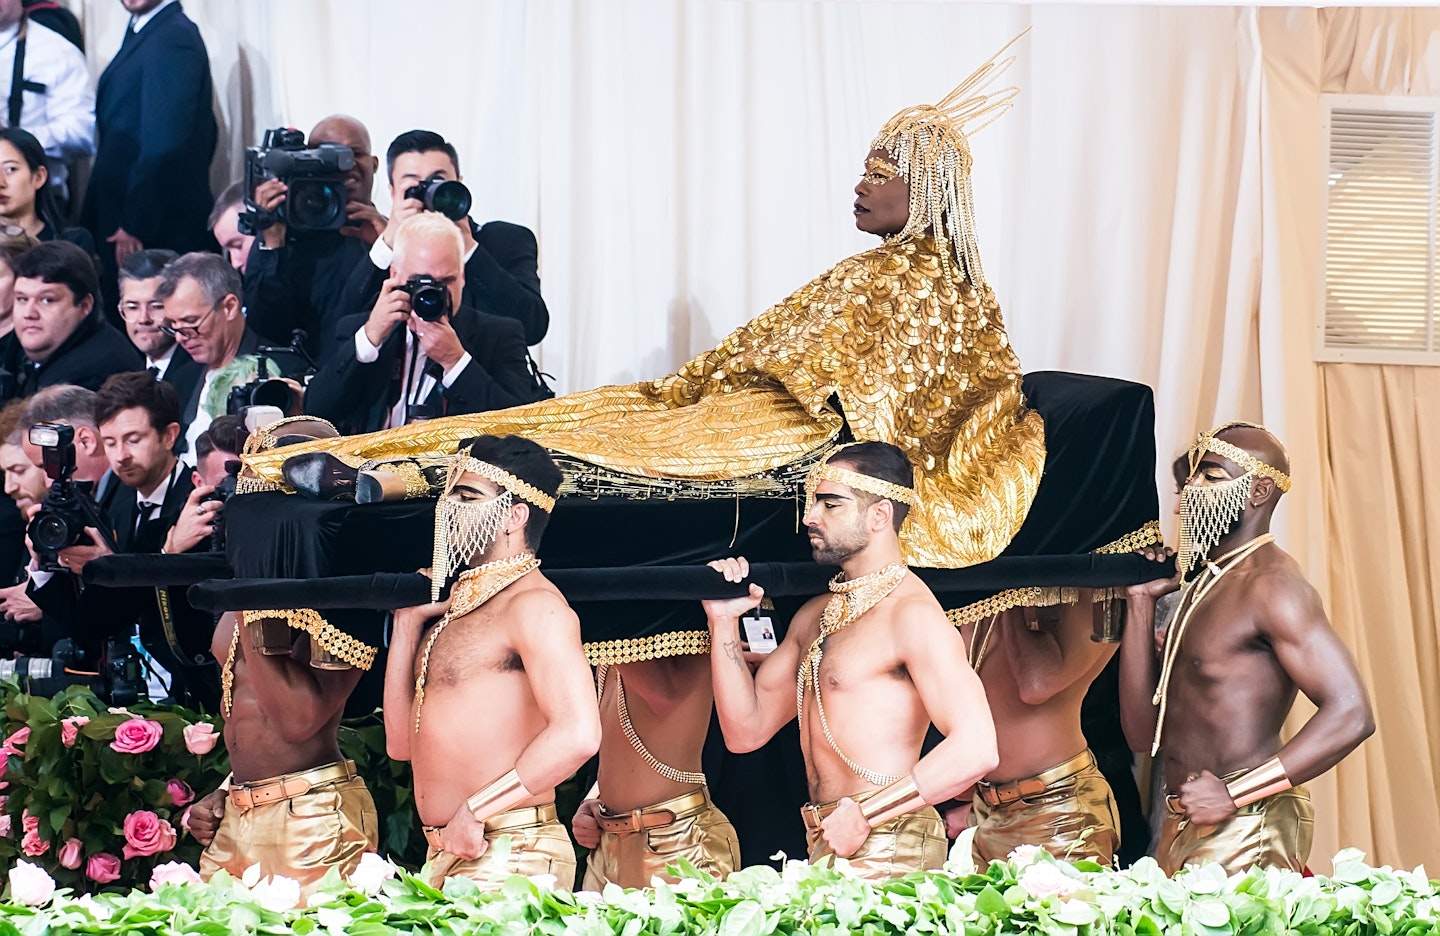 billy porter at the met gala in 2019